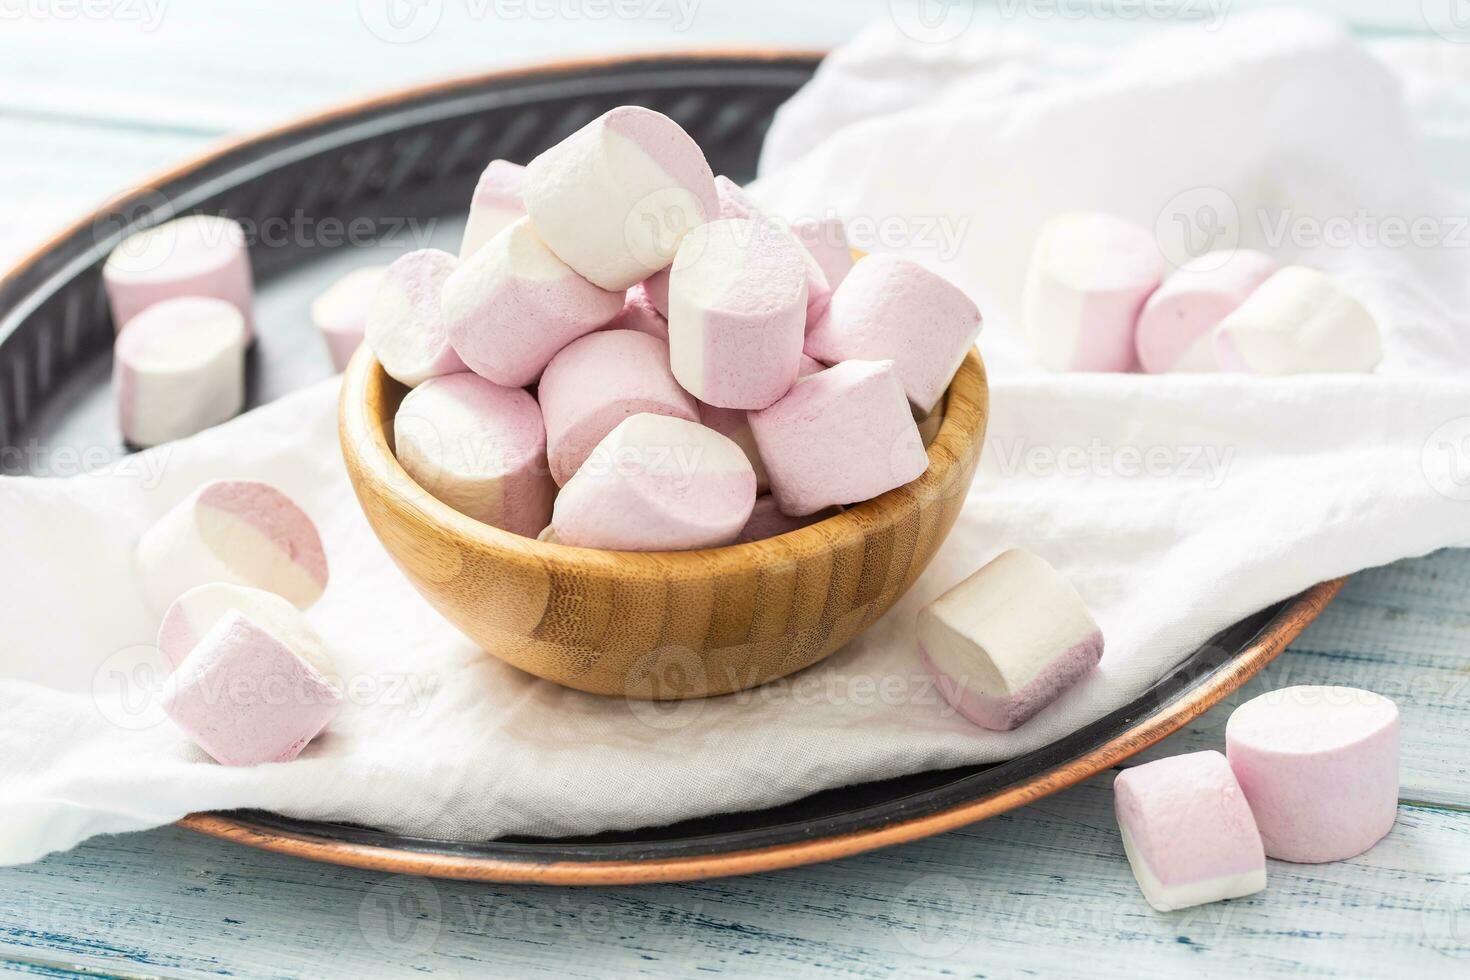 Wooden bowl full of pink and white marshmallows with some scattered around on a white table cloth, dark tray and white wooden table photo